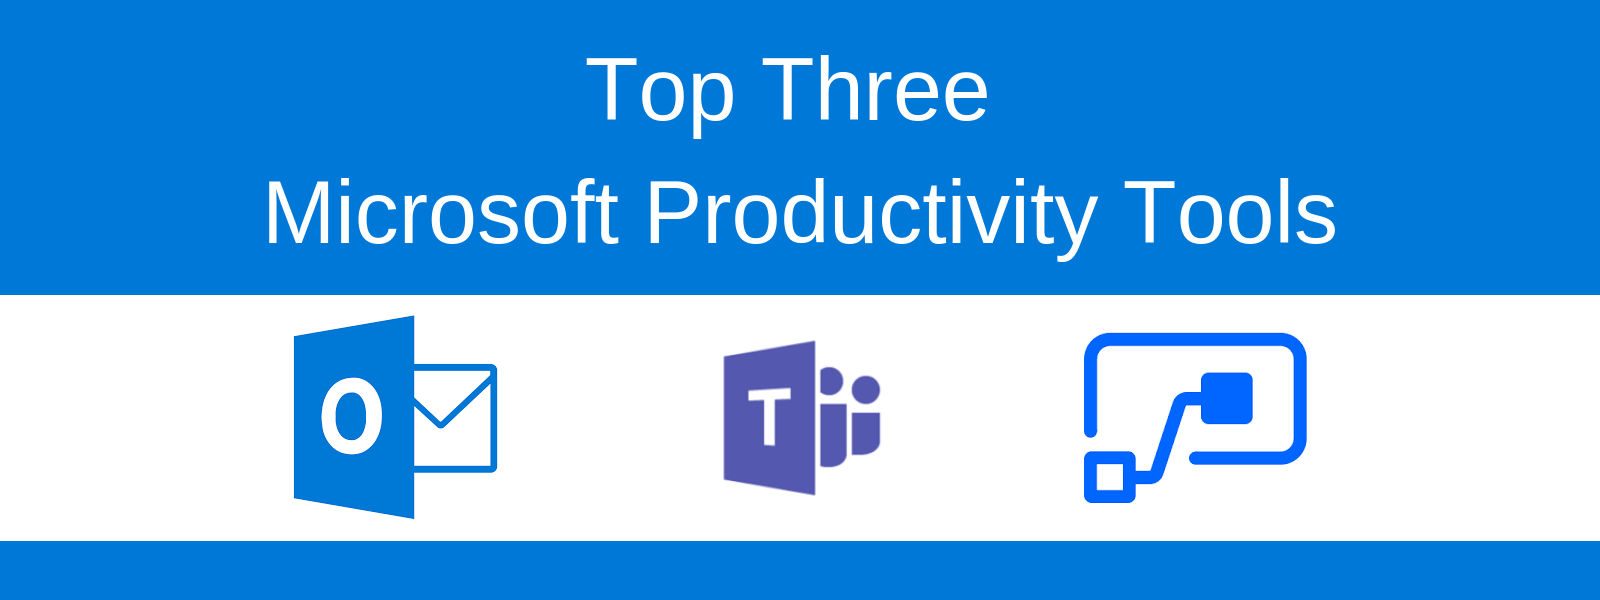 Up your game with Microsoft Productivity Tools | Industry news | Blog